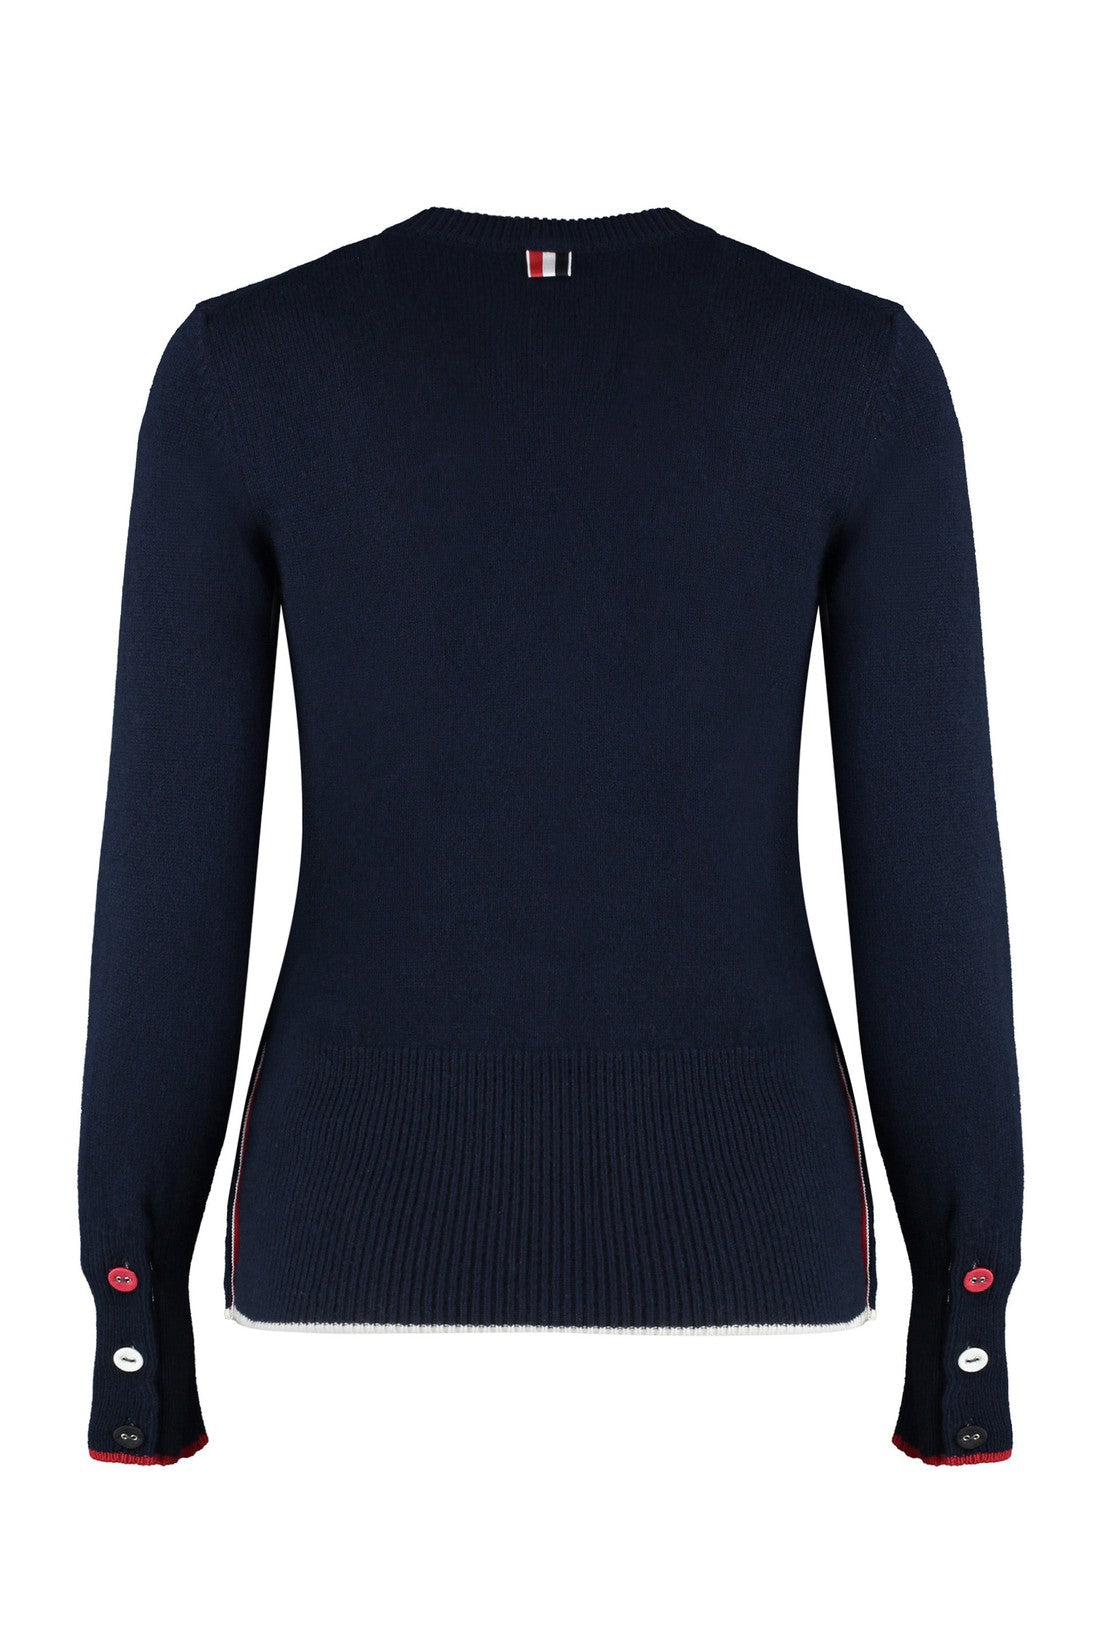 Thom Browne-OUTLET-SALE-virgin wool crew-neck sweater-ARCHIVIST